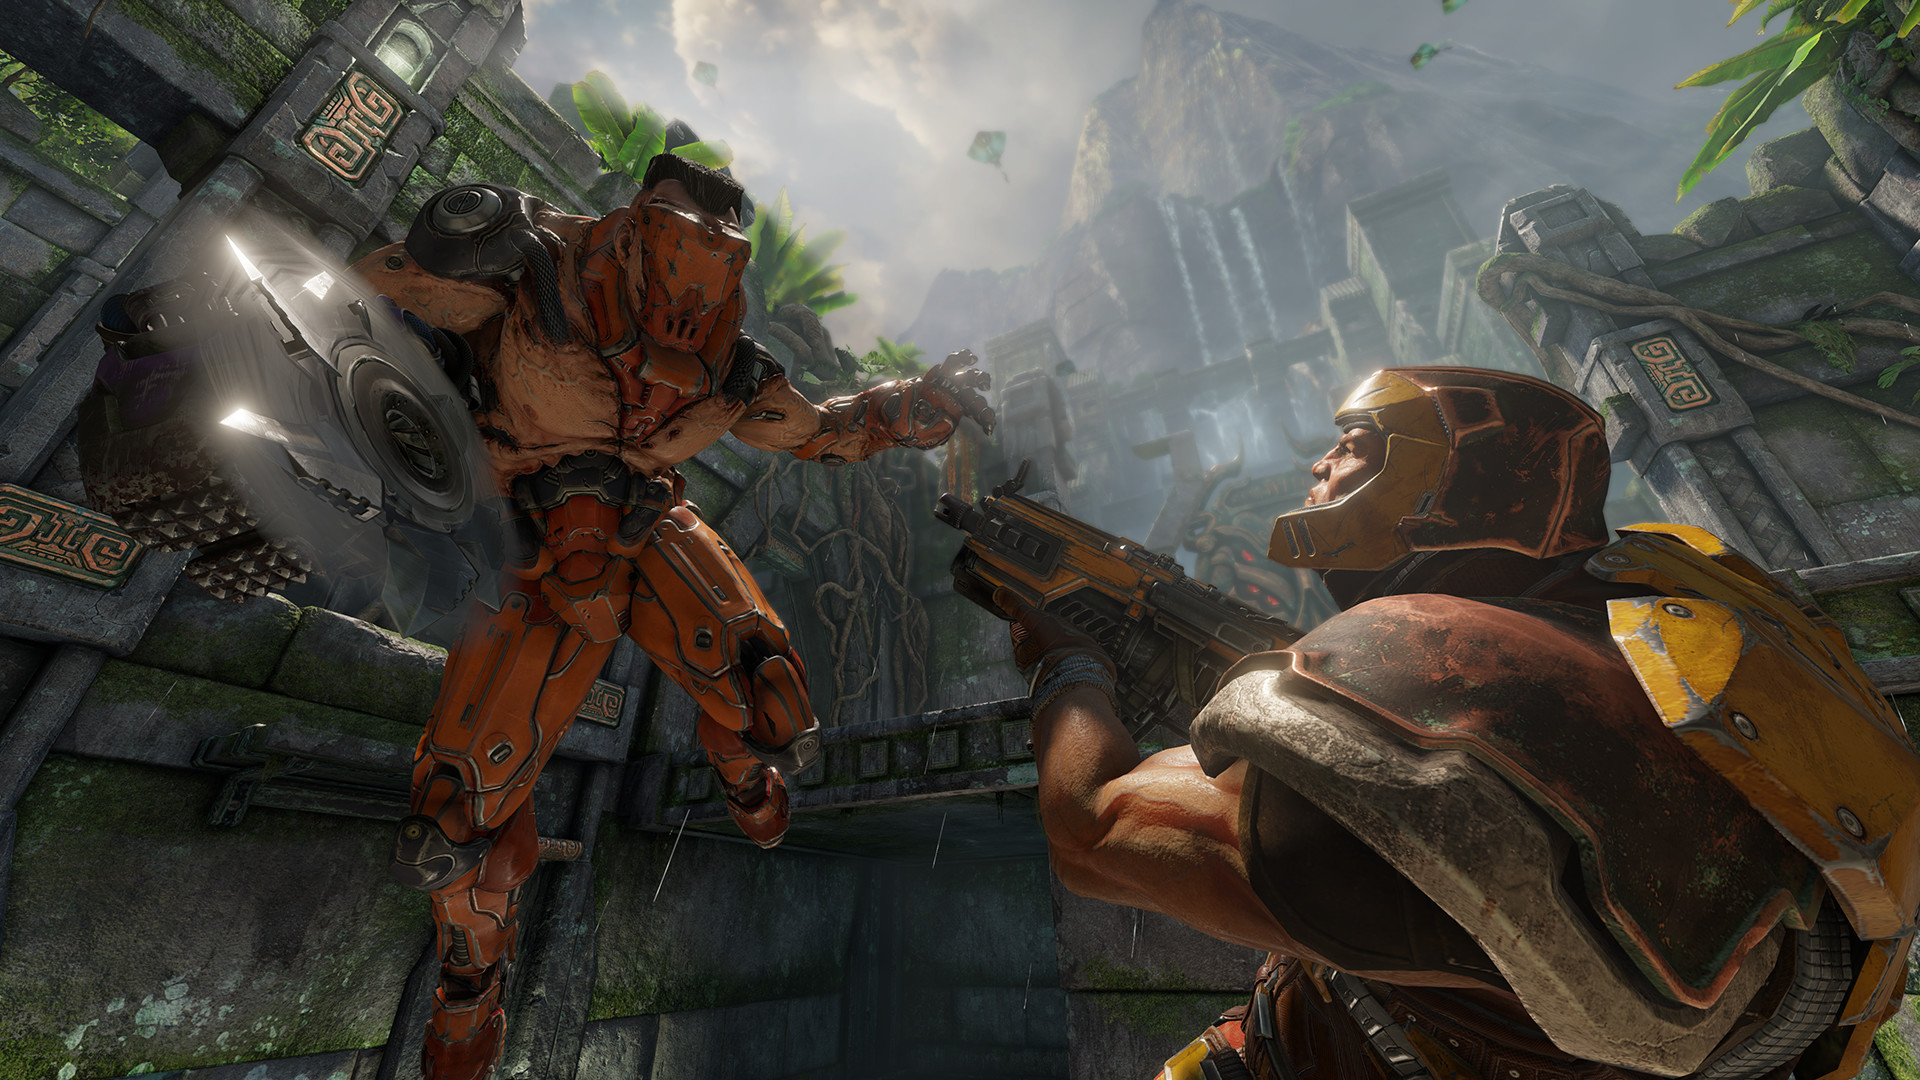 Kilimanjaro Trolley Dyrke motion id Software Readies Quake Champions with Vulkan Support and Ryzen  Optimization | TechPowerUp